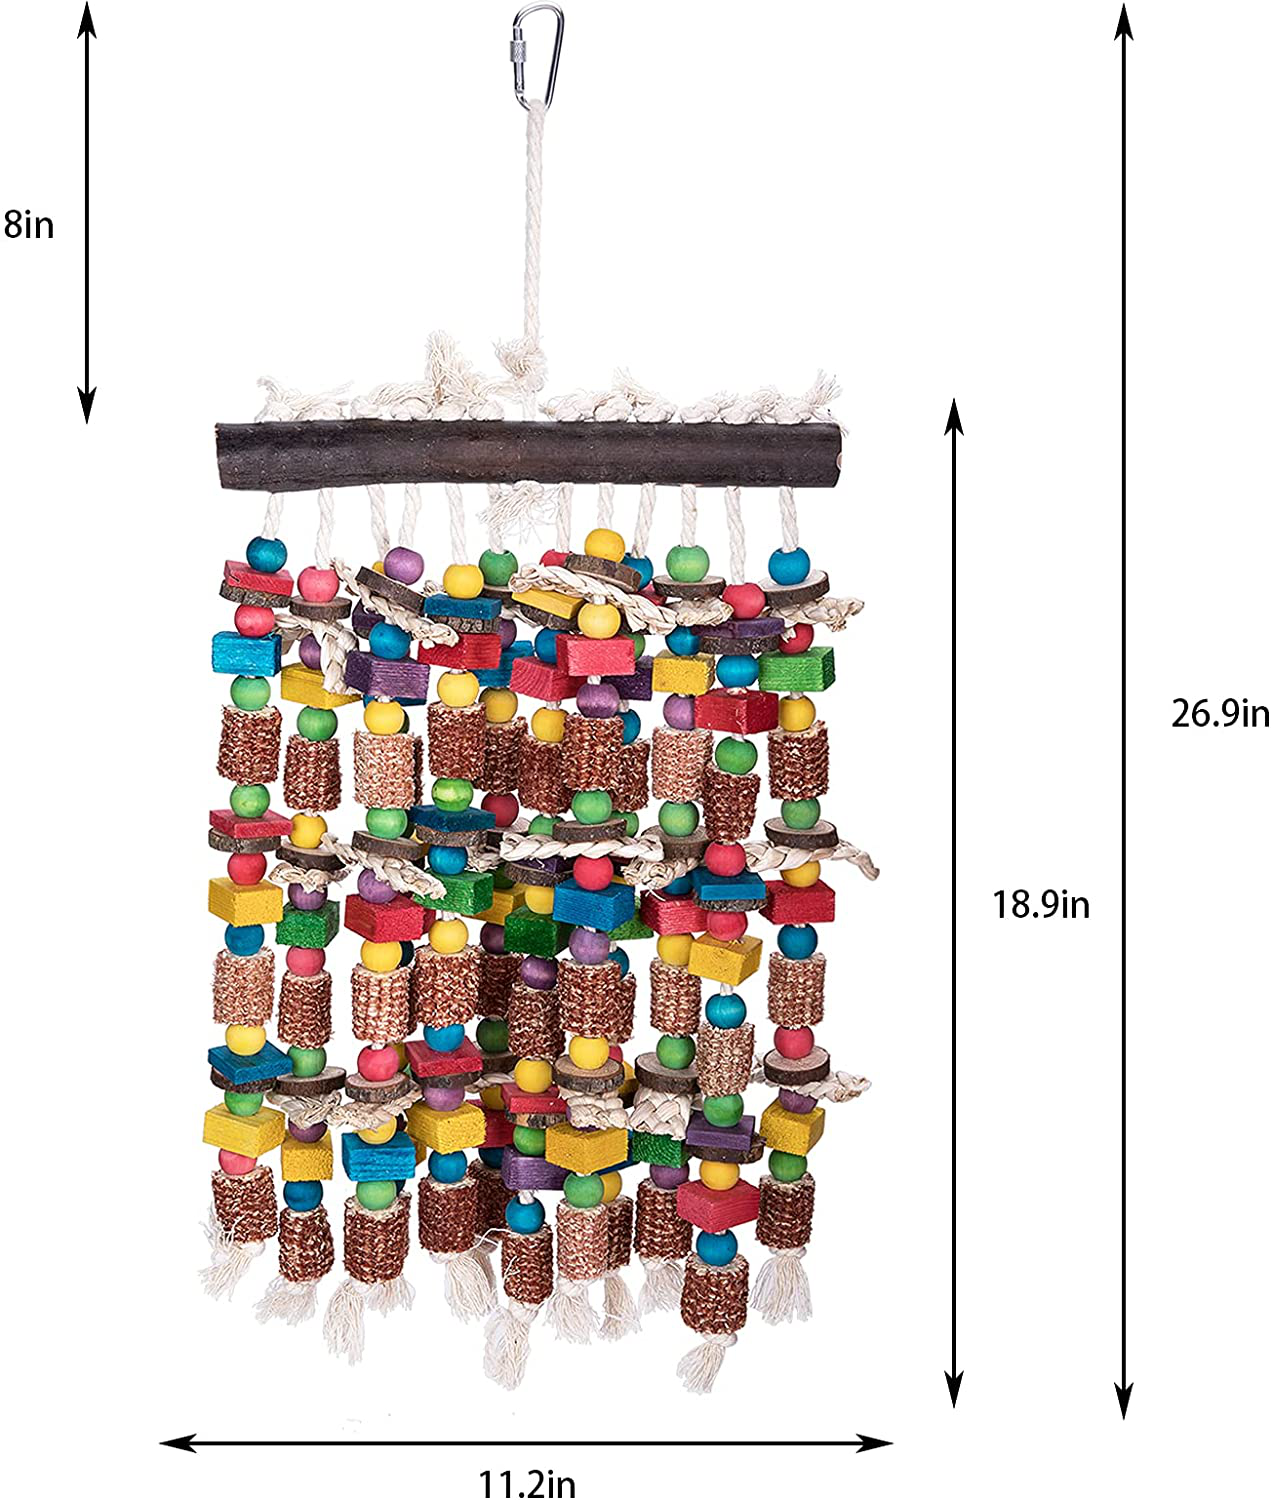 Wehhbtye Super Large Bird Parrot Macaw Chewing Toy-27''X11'' Multicolor Natural Wood Block Knot Bird Bite Tearing Toy,Parrot Corn Cob Chewing Toy for Macaws Cokatoos,African Grey,All Amazona Parrot